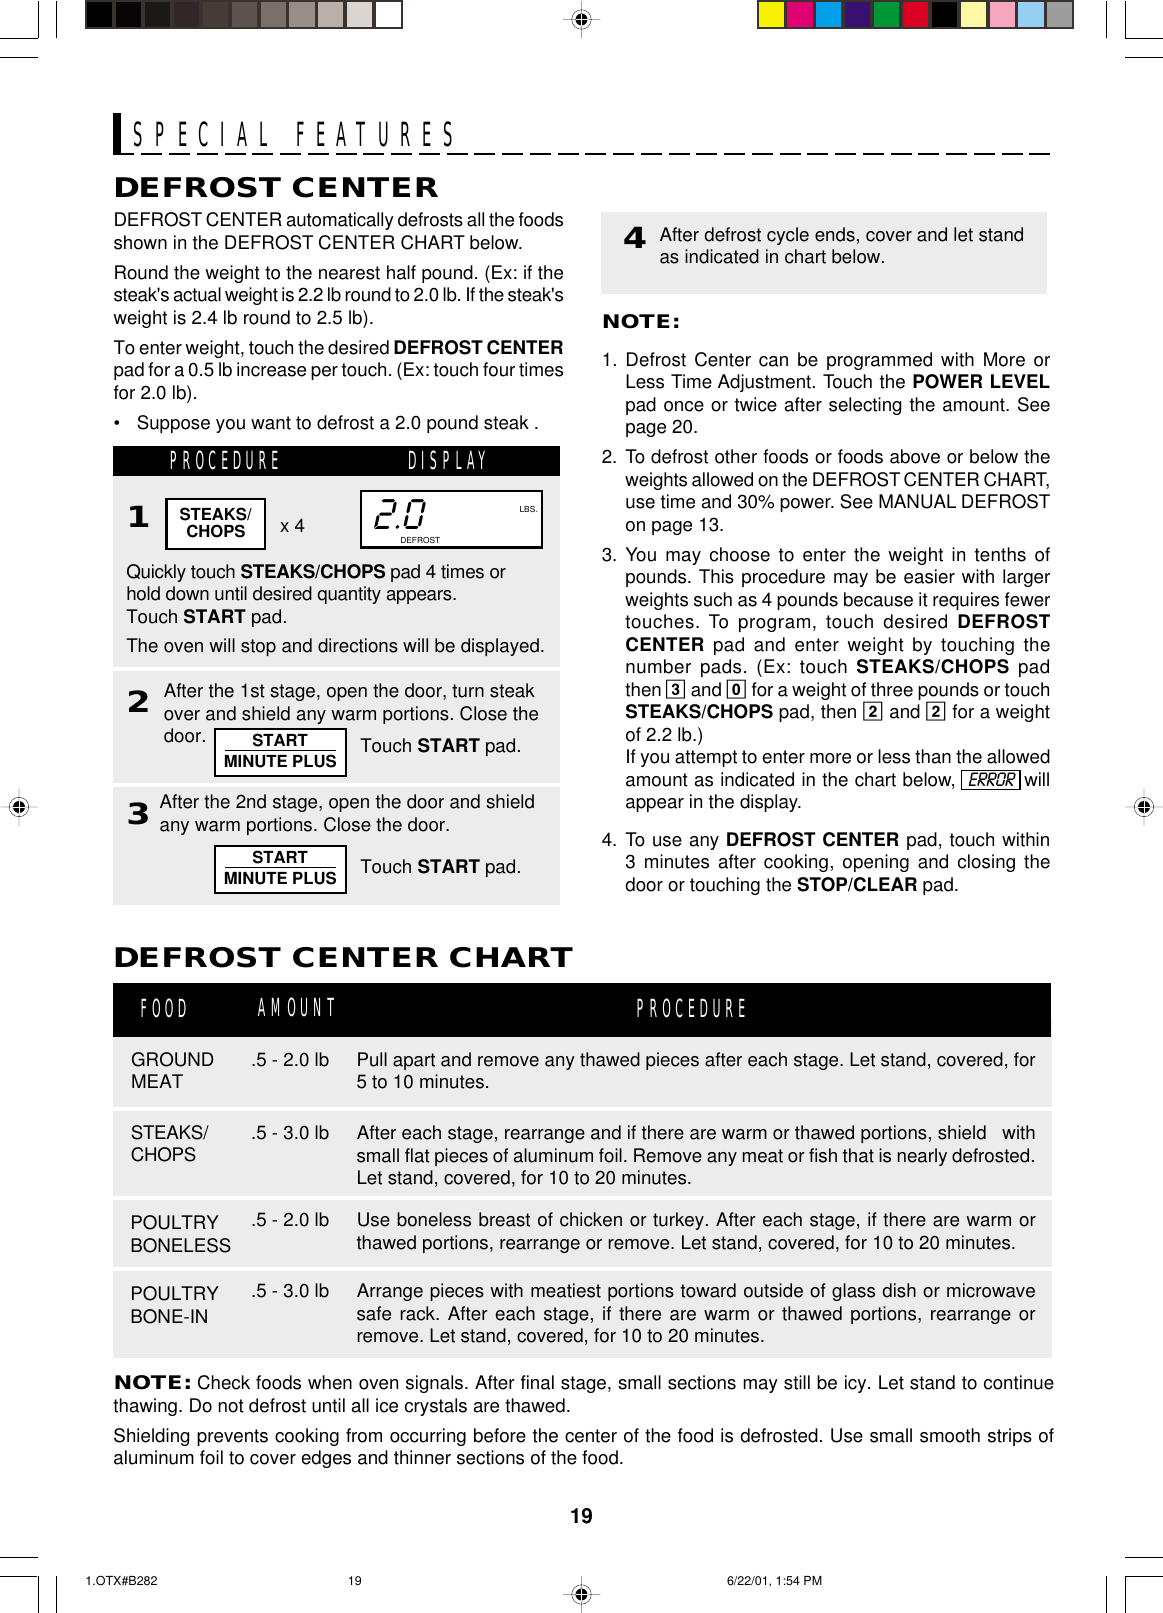 19SPECIAL FEATURESDEFROST CENTERDEFROST CENTER automatically defrosts all the foodsshown in the DEFROST CENTER CHART below.Round the weight to the nearest half pound. (Ex: if thesteak&apos;s actual weight is 2.2 lb round to 2.0 lb. If the steak&apos;sweight is 2.4 lb round to 2.5 lb).To enter weight, touch the desired DEFROST CENTERpad for a 0.5 lb increase per touch. (Ex: touch four timesfor 2.0 lb).• Suppose you want to defrost a 2.0 pound steak .PROCEDURE DISPLAY1x 4Quickly touch STEAKS/CHOPS pad 4 times orhold down until desired quantity appears.Touch START pad.The oven will stop and directions will be displayed.2NOTE:1. Defrost Center can be programmed with More orLess Time Adjustment. Touch the POWER LEVELpad once or twice after selecting the amount. Seepage 20.2. To defrost other foods or foods above or below theweights allowed on the DEFROST CENTER CHART,use time and 30% power. See MANUAL DEFROSTon page 13.3. You may choose to enter the weight in tenths ofpounds. This procedure may be easier with largerweights such as 4 pounds because it requires fewertouches. To program, touch desired DEFROSTCENTER pad and enter weight by touching thenumber pads. (Ex: touch STEAKS/CHOPS padthen 3 and 0 for a weight of three pounds or touchSTEAKS/CHOPS pad, then 2 and 2 for a weightof 2.2 lb.)If you attempt to enter more or less than the allowedamount as indicated in the chart below,  ERROR  willappear in the display.4. To use any DEFROST CENTER pad, touch within3 minutes after cooking, opening and closing thedoor or touching the STOP/CLEAR pad.4After defrost cycle ends, cover and let standas indicated in chart below.NOTE: Check foods when oven signals. After final stage, small sections may still be icy. Let stand to continuethawing. Do not defrost until all ice crystals are thawed.Shielding prevents cooking from occurring before the center of the food is defrosted. Use small smooth strips ofaluminum foil to cover edges and thinner sections of the food.DEFROST CENTER CHARTGROUNDMEATFOOD PROCEDUREPOULTRYBONELESS.5 - 2.0 lb.5 - 2.0 lbSTEAKS/CHOPS .5 - 3.0 lb2.0NO.LBS.CUPSOZ.COOK DEFROSTAfter the 1st stage, open the door, turn steakover and shield any warm portions. Close thedoor. Touch START pad.AMOUNT3After the 2nd stage, open the door and shieldany warm portions. Close the door.Touch START pad.STEAKS/CHOPSPOULTRYBONE-IN.5 - 3.0 lbPull apart and remove any thawed pieces after each stage. Let stand, covered, for5 to 10 minutes.After each stage, rearrange and if there are warm or thawed portions, shield   withsmall flat pieces of aluminum foil. Remove any meat or fish that is nearly defrosted.Let stand, covered, for 10 to 20 minutes.Use boneless breast of chicken or turkey. After each stage, if there are warm orthawed portions, rearrange or remove. Let stand, covered, for 10 to 20 minutes.Arrange pieces with meatiest portions toward outside of glass dish or microwavesafe rack. After each stage, if there are warm or thawed portions, rearrange orremove. Let stand, covered, for 10 to 20 minutes.STARTMINUTE PLUSSTARTMINUTE PLUS1.OTX#B282 6/22/01, 1:54 PM19